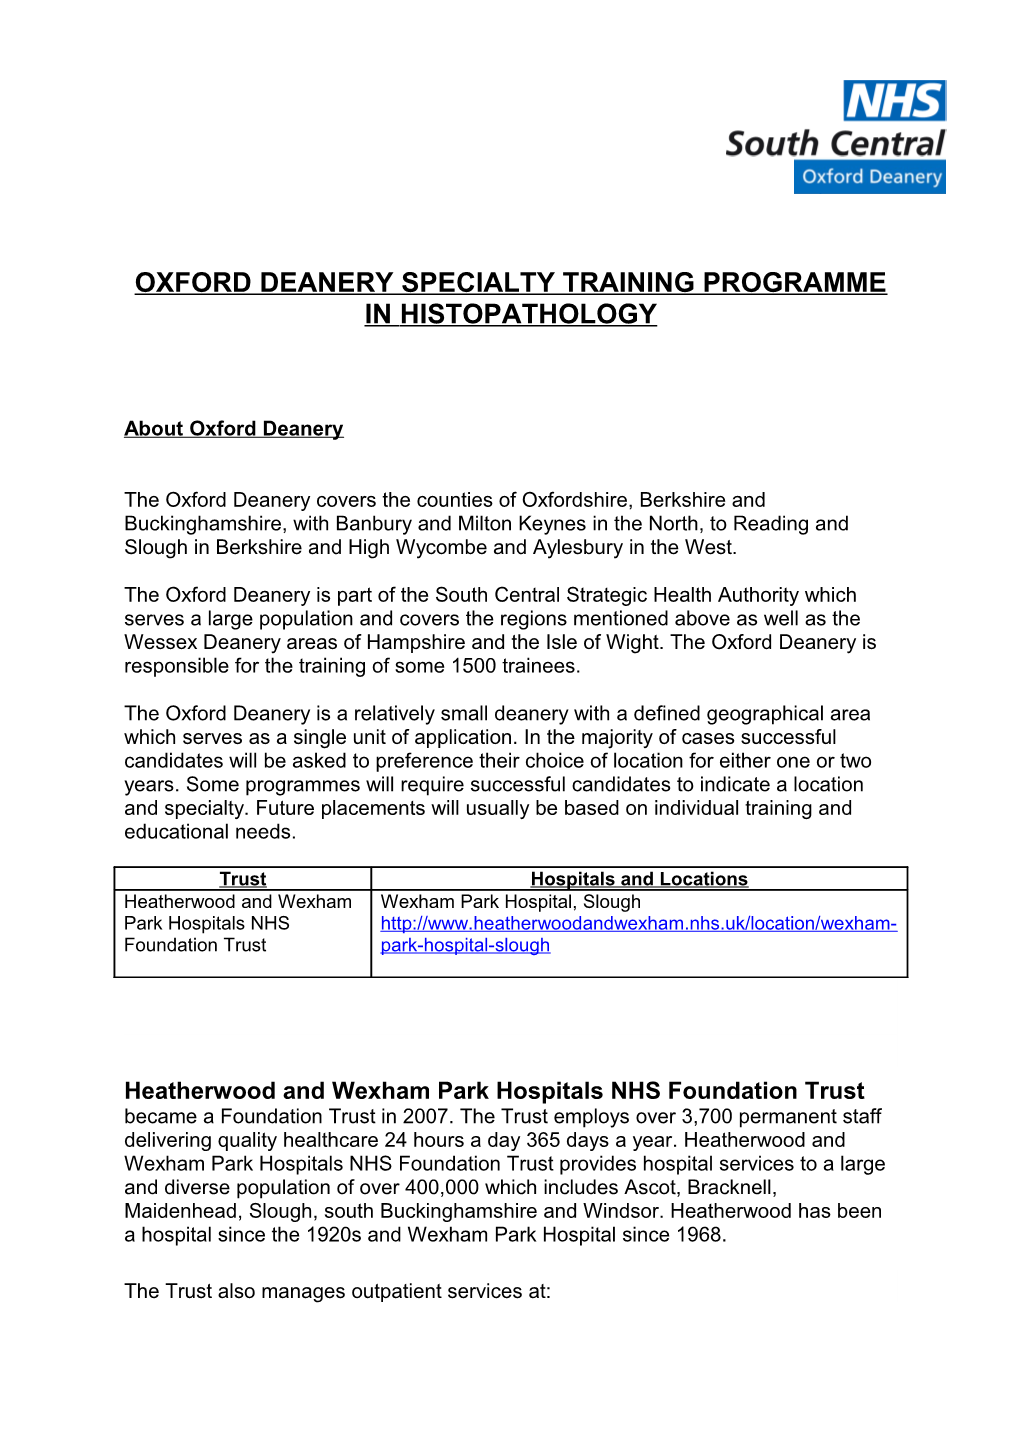 Oxford Deanery Specialty Training Programme in Histopathology